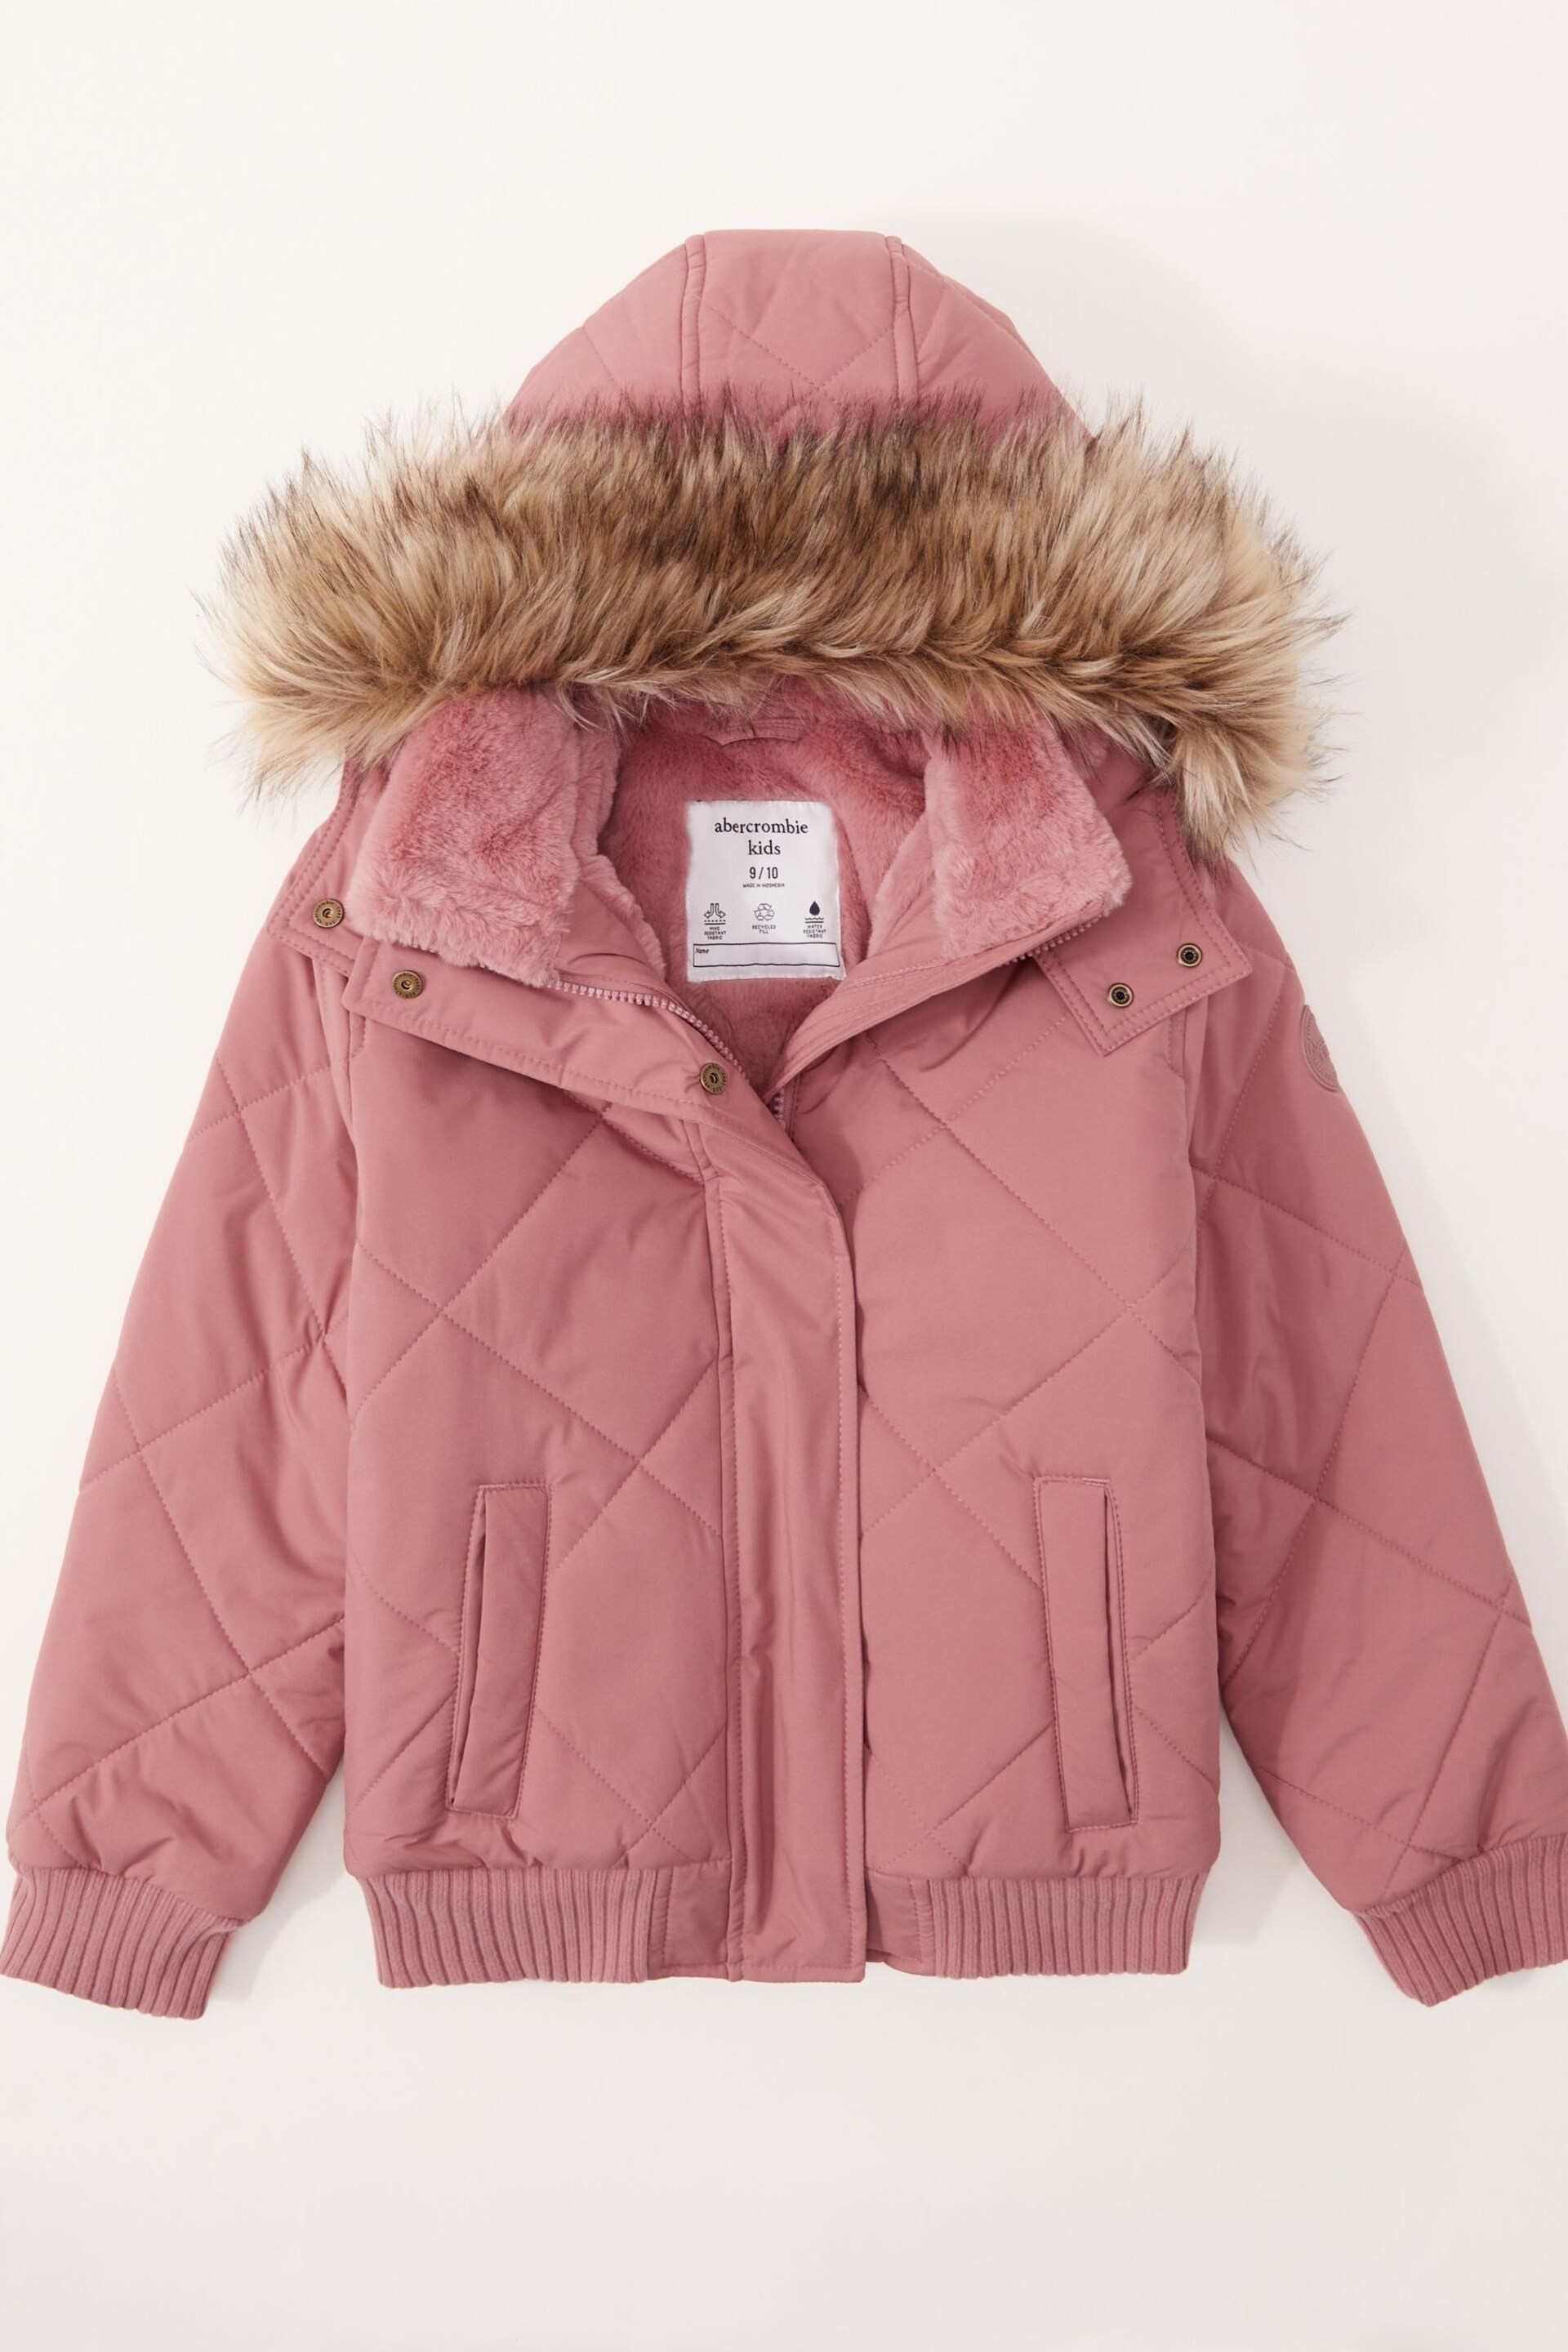 Abercrombie & Fitch Faux Fur Padded Coat - Image 1 of 8